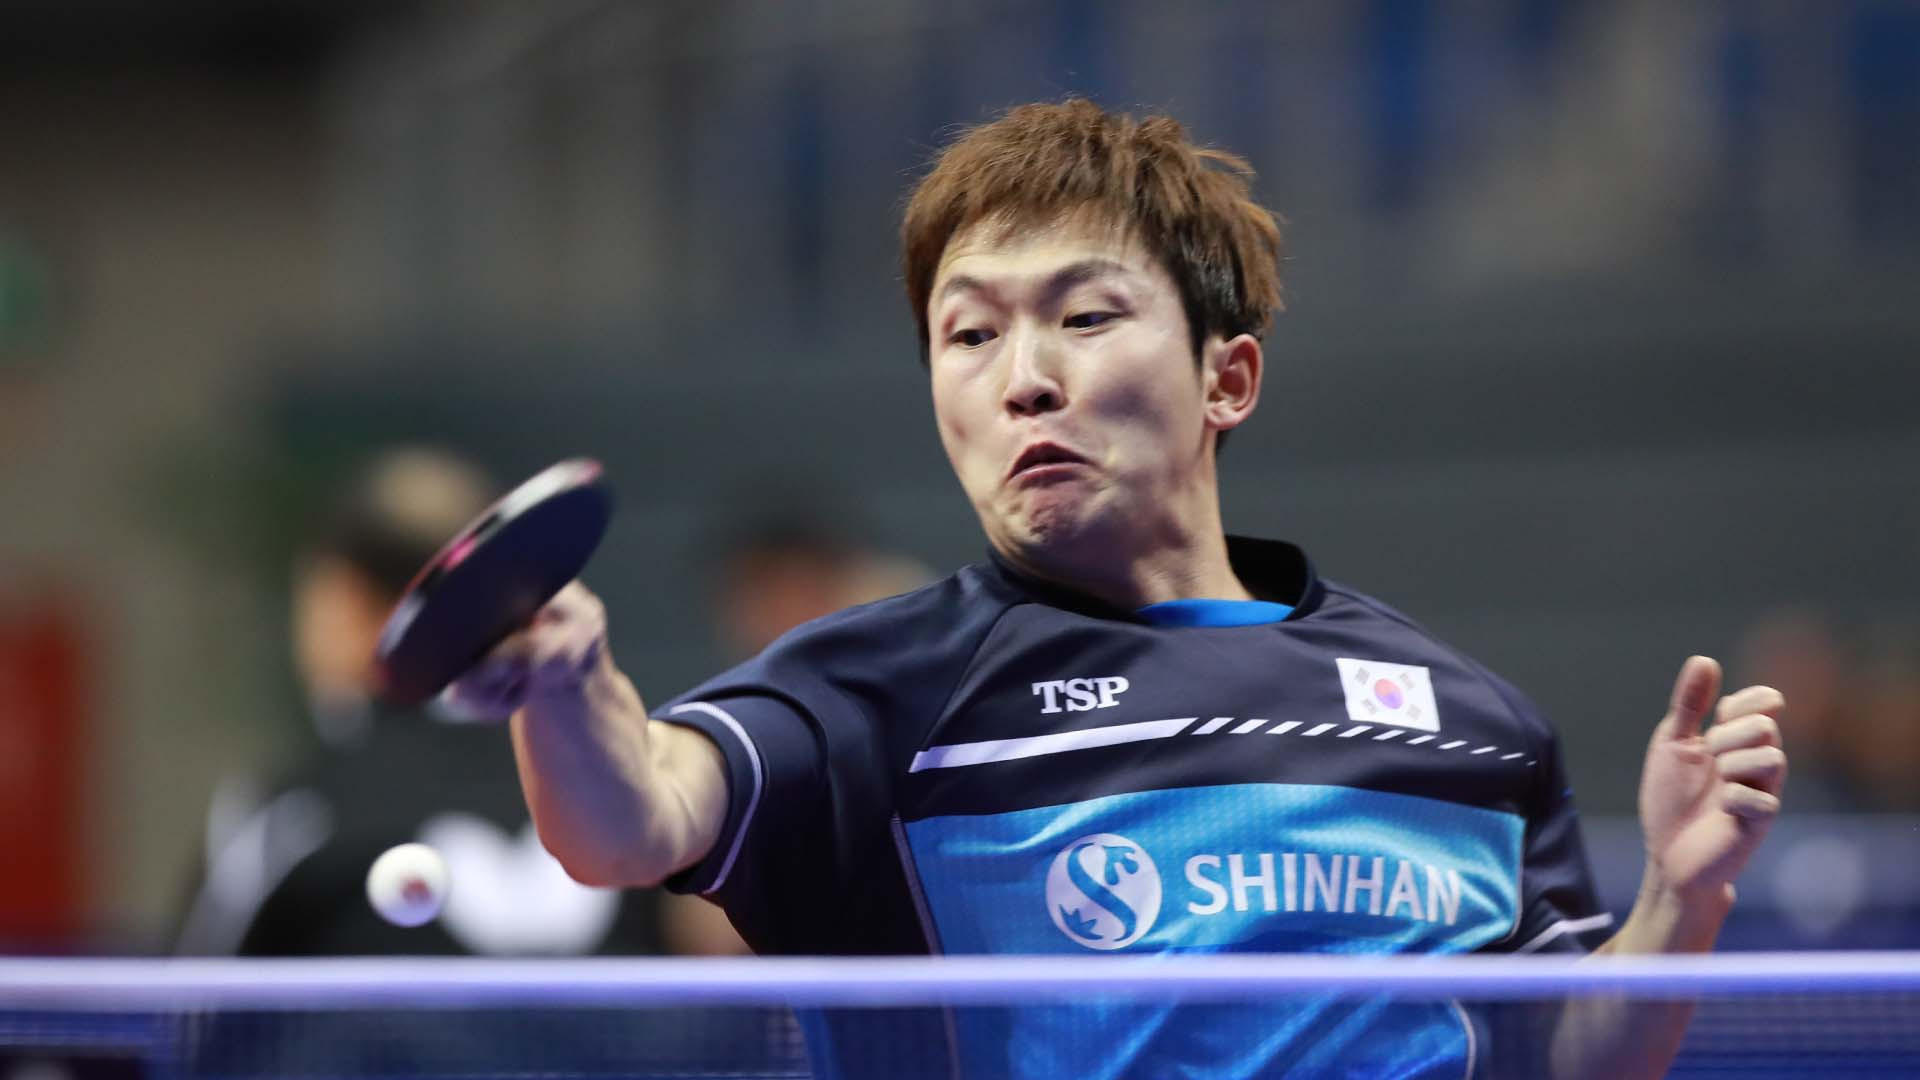 Highly ranked home player Jeong Sangeun loses in qualifying at ITTF Korea Open